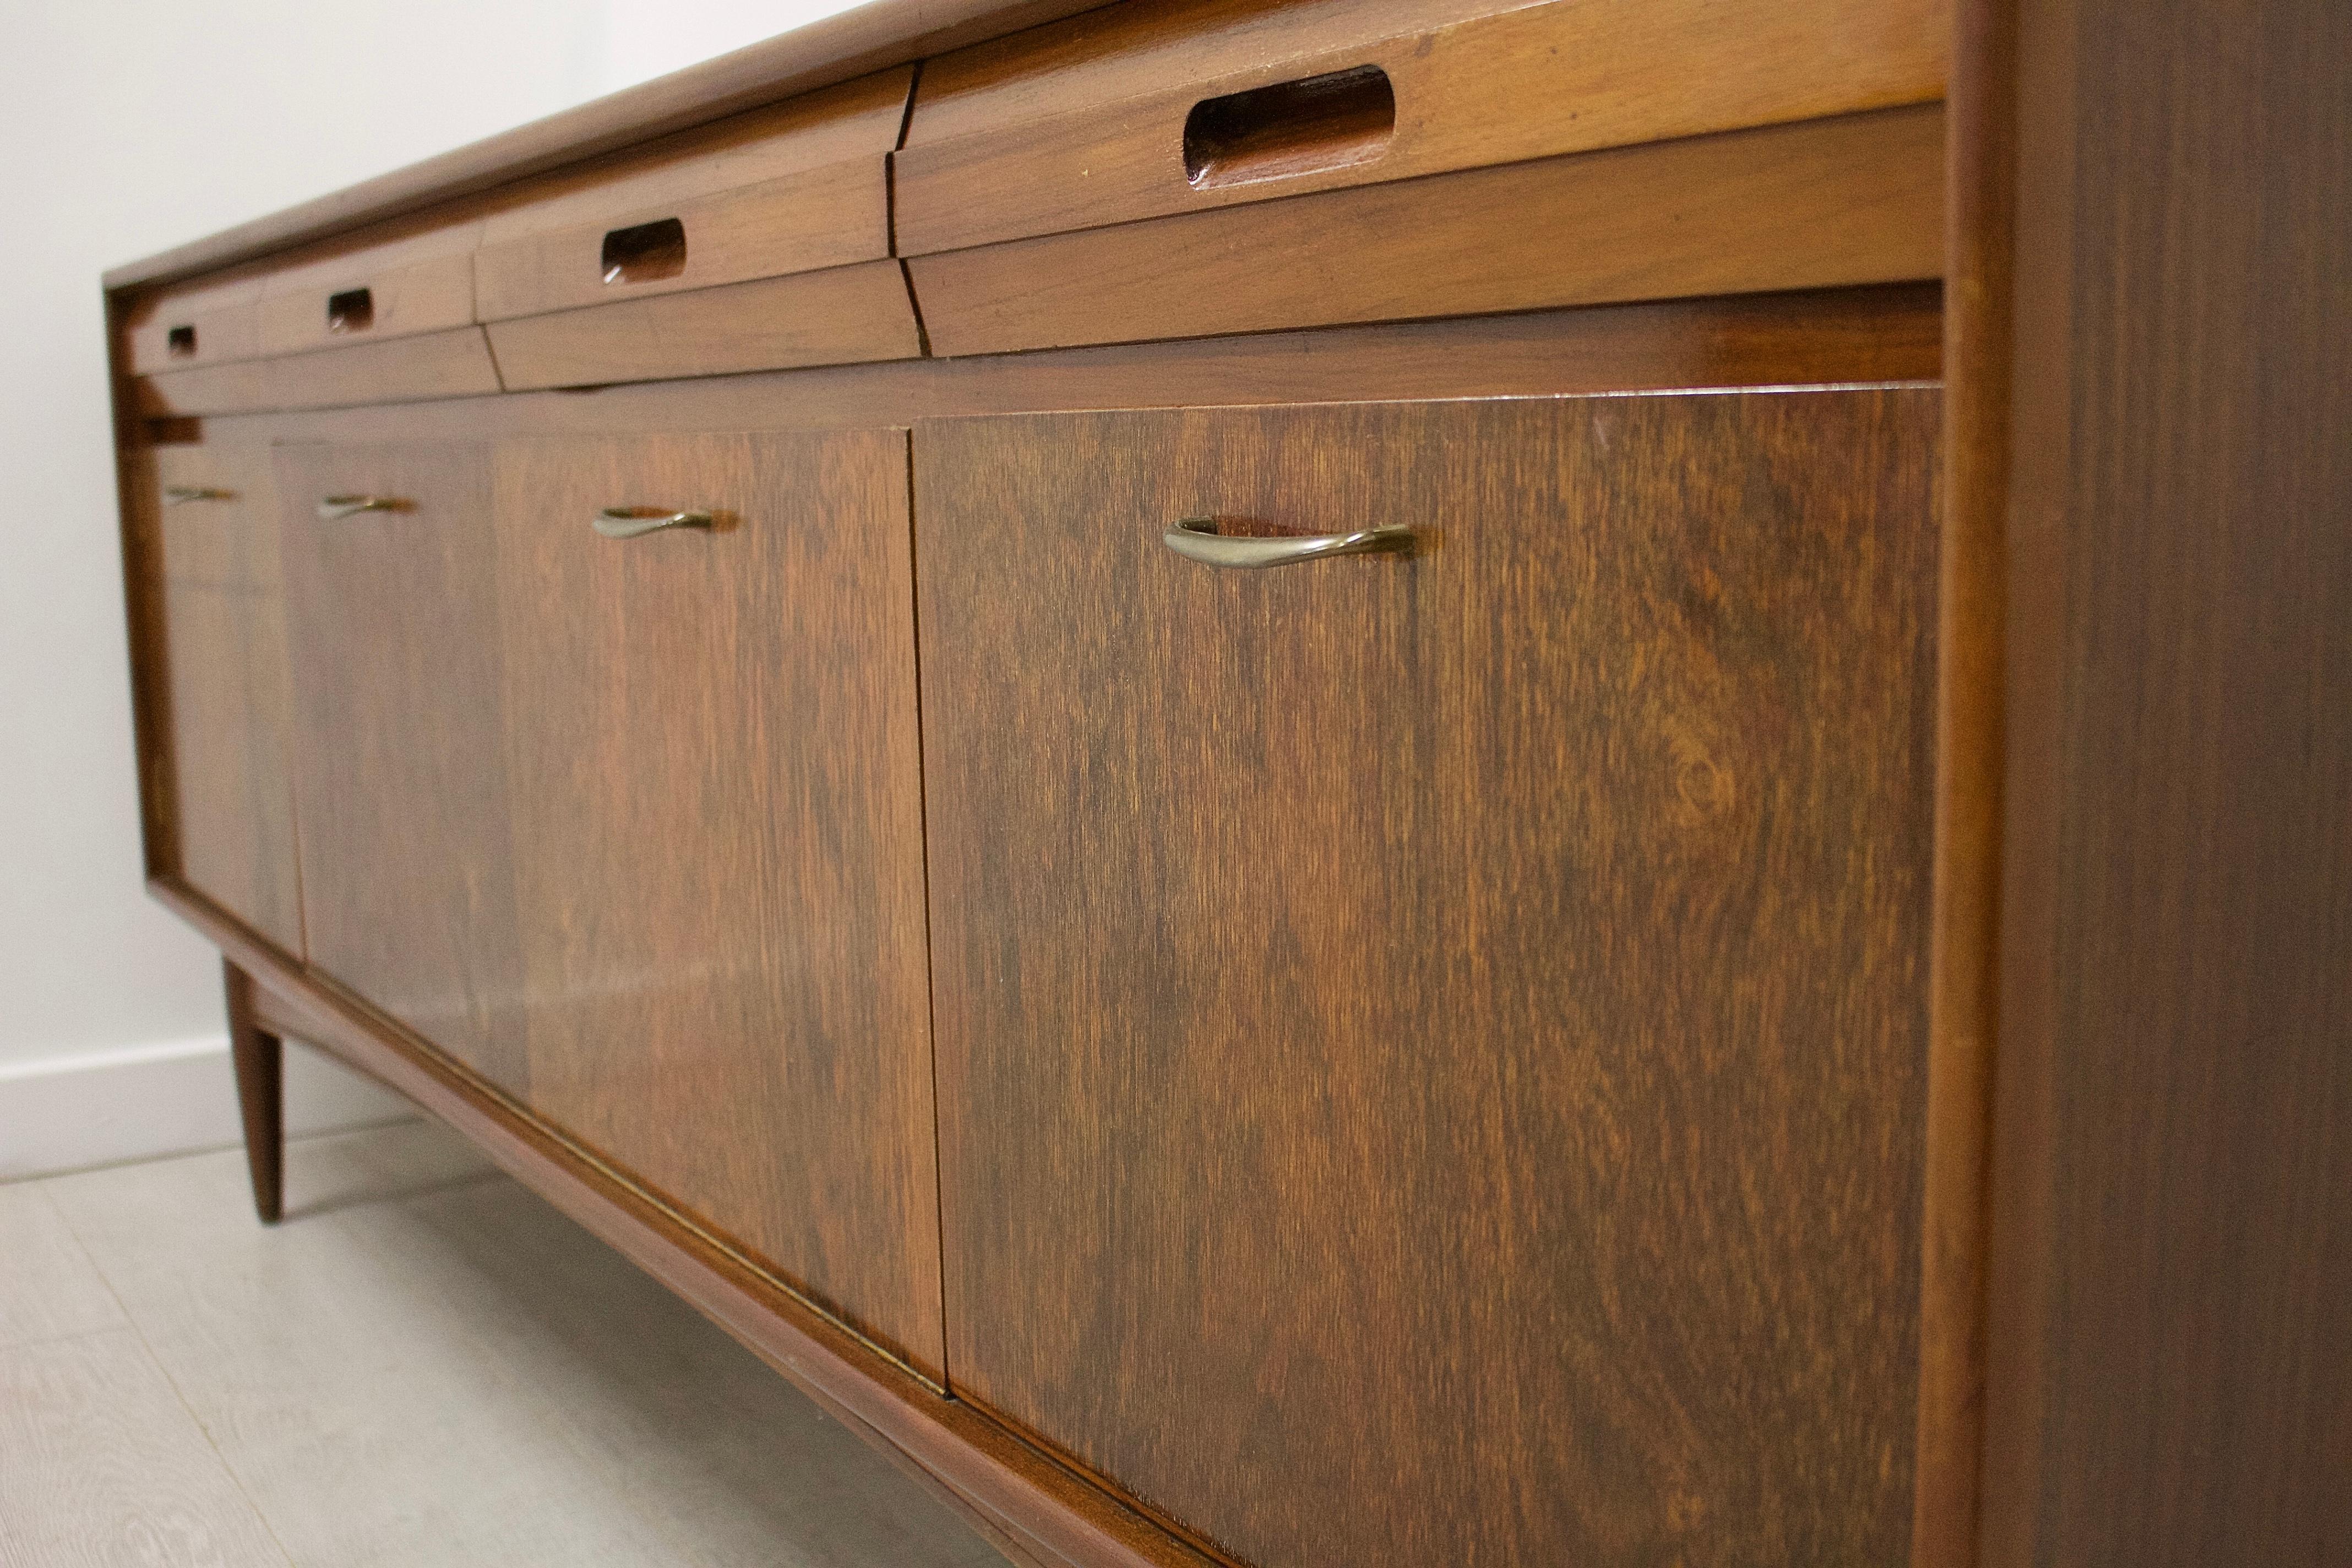 British Midcentury Sideboard from White and Newton, 1960s For Sale